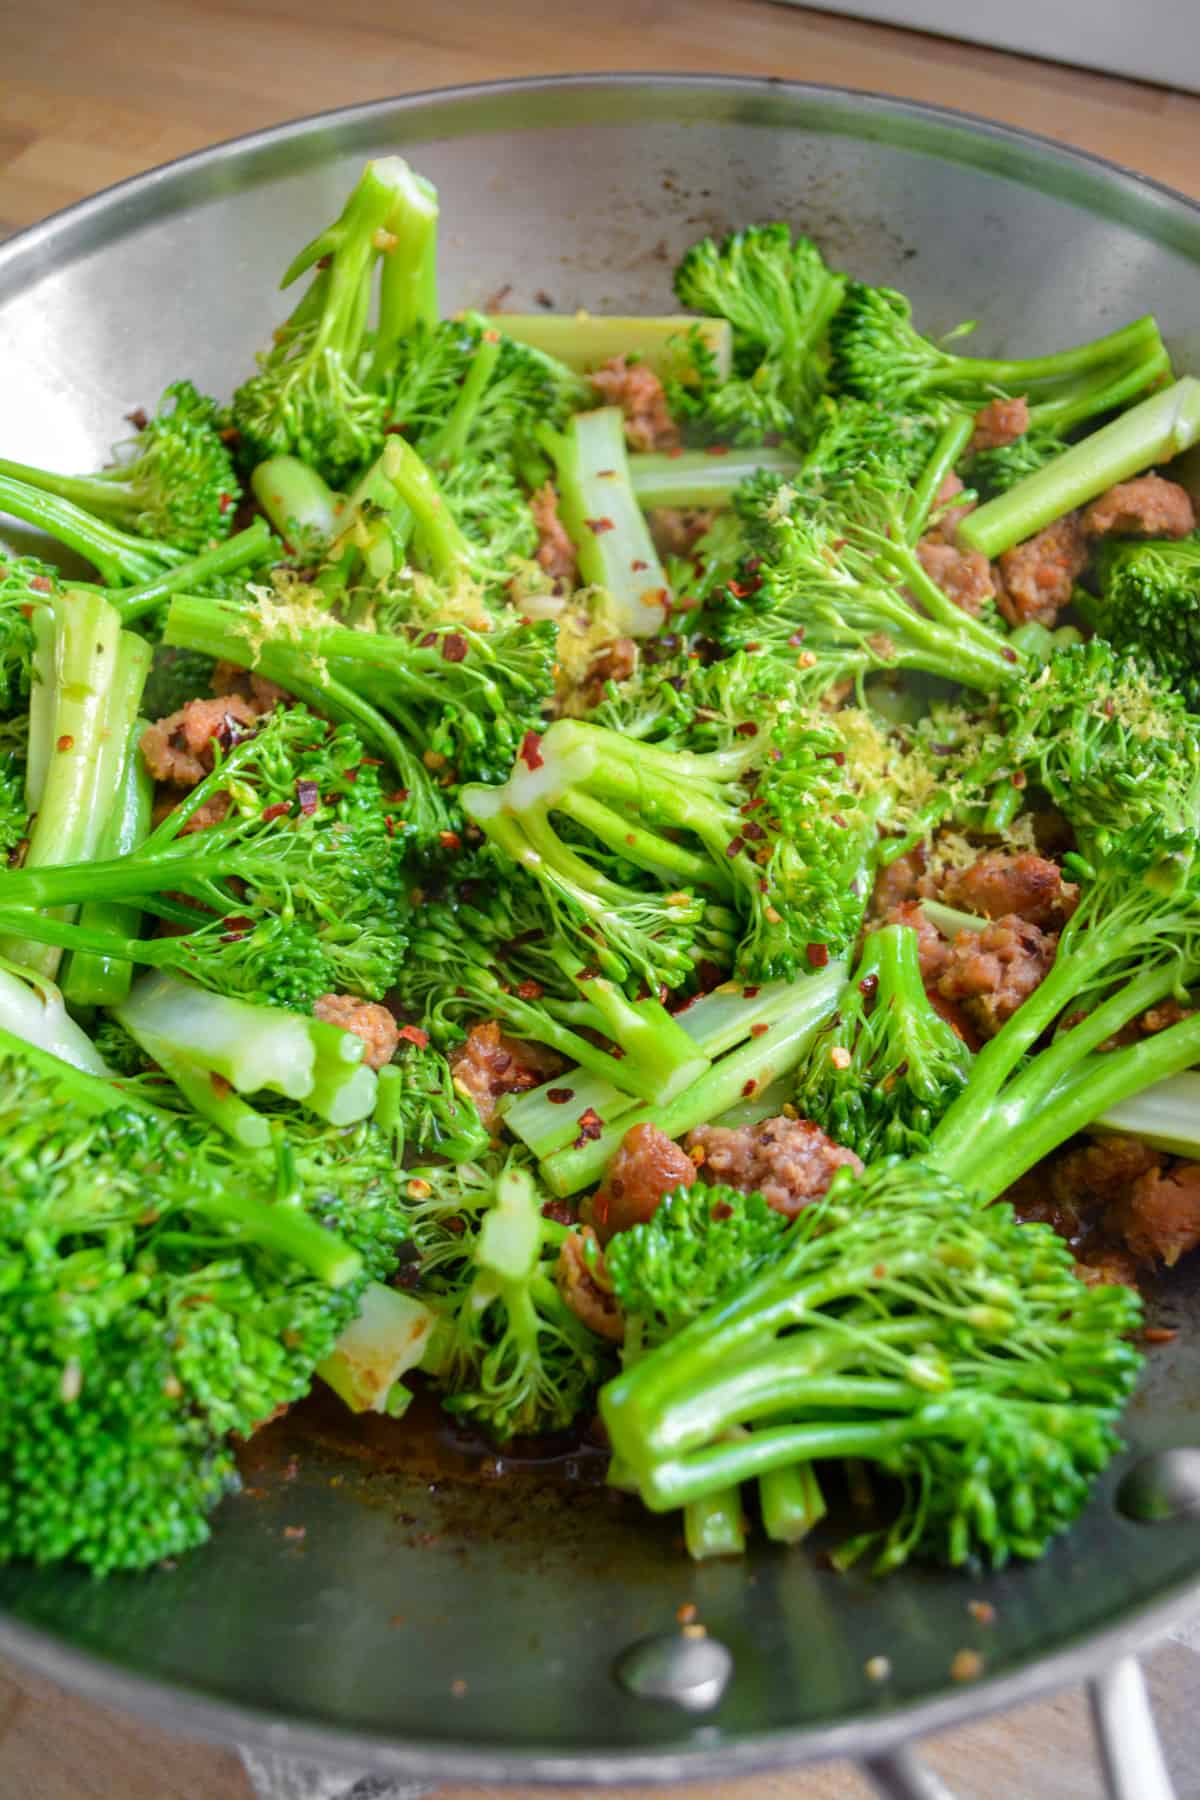 Lemon zest, vegetable stock and red pepper flakes added on top of the broccolini in a large skillet.